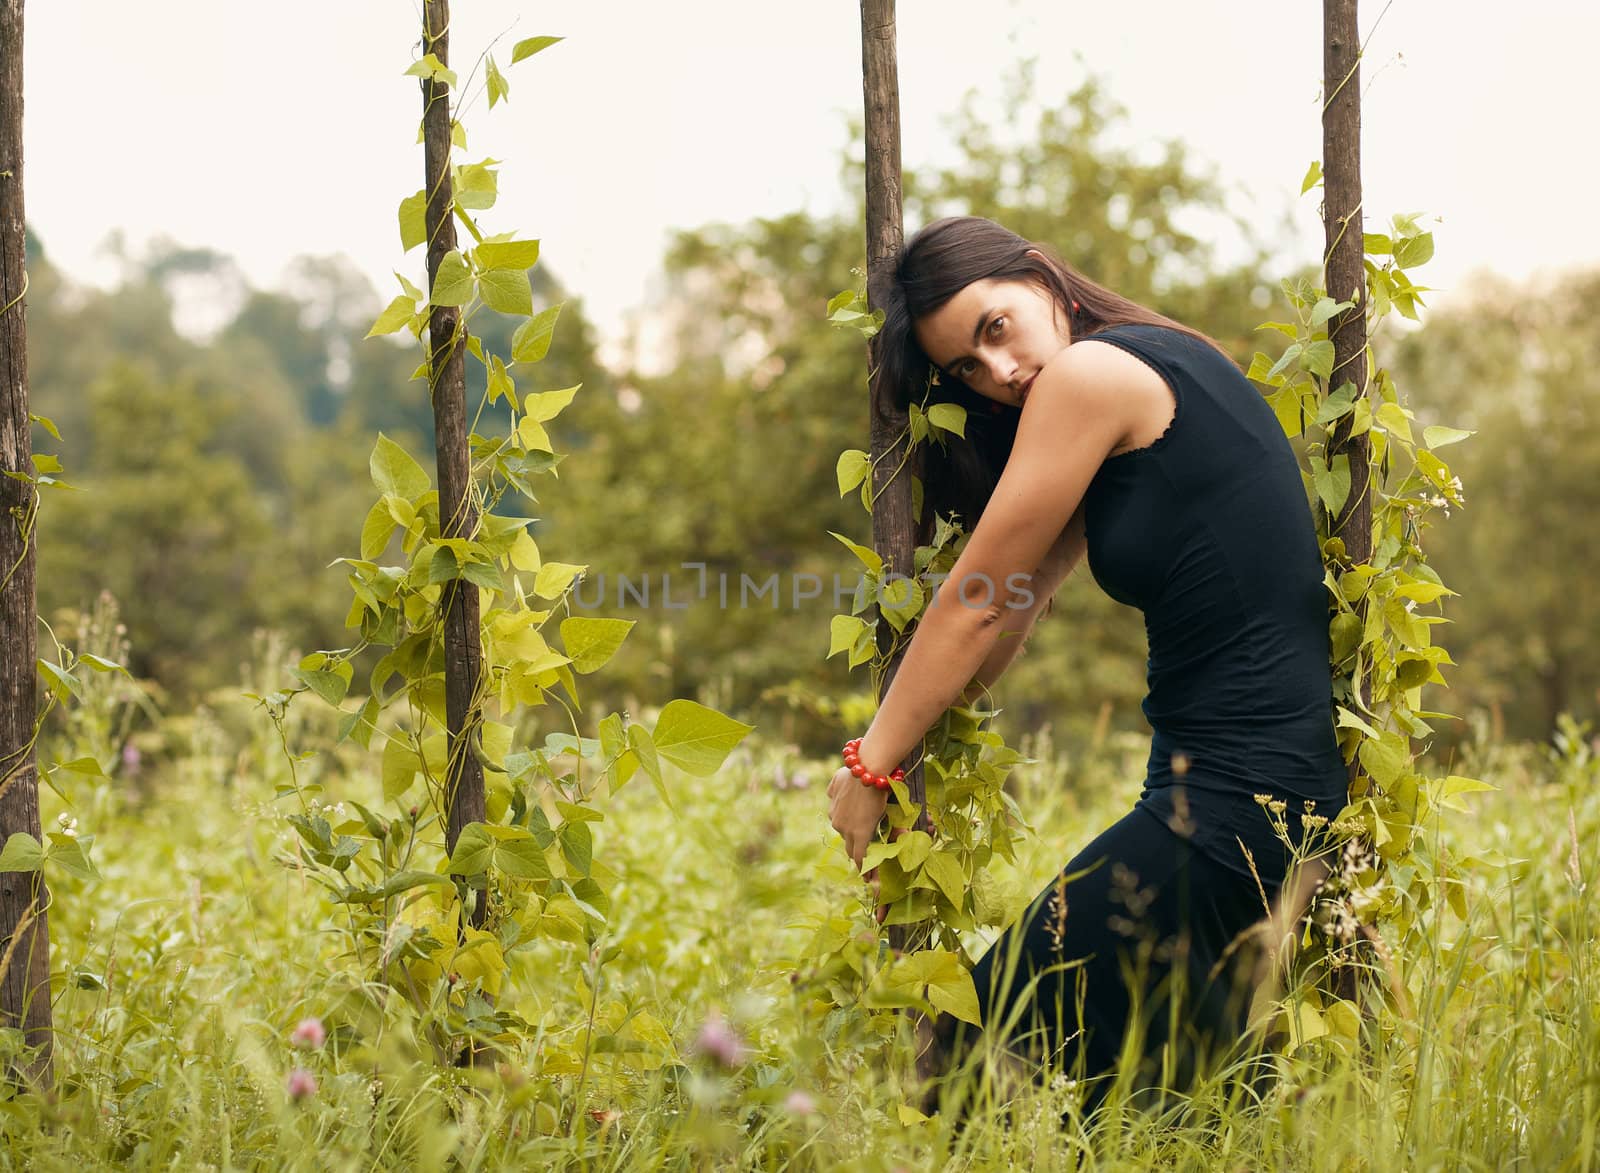 Portrait of beautiful model in black on nature background, posing.